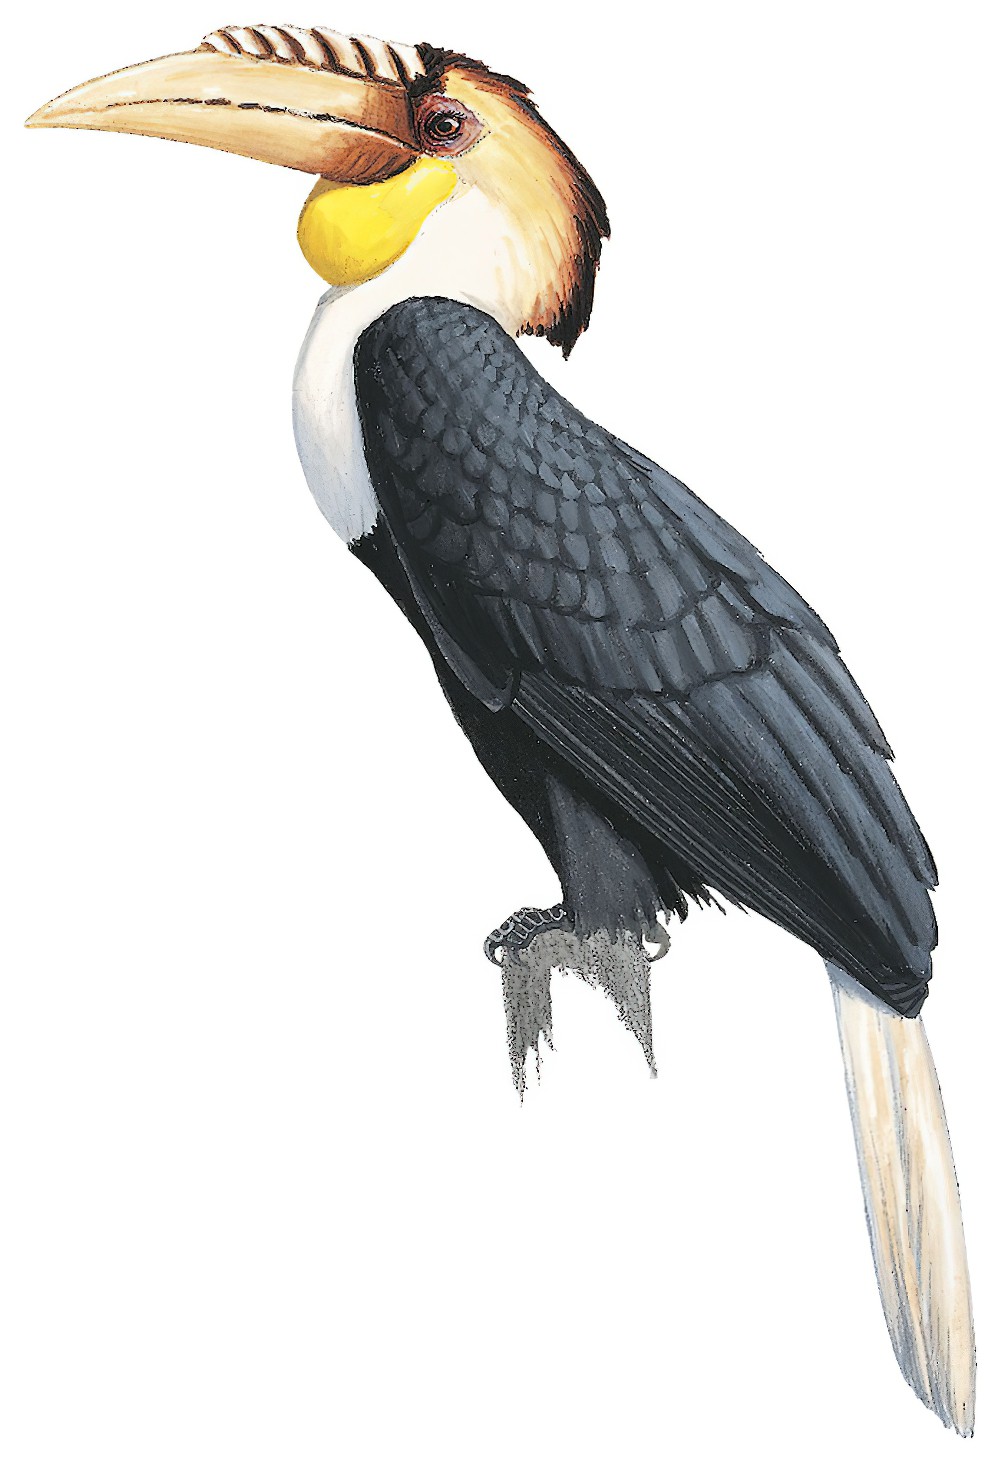 Plain-pouched Hornbill / Rhyticeros subruficollis